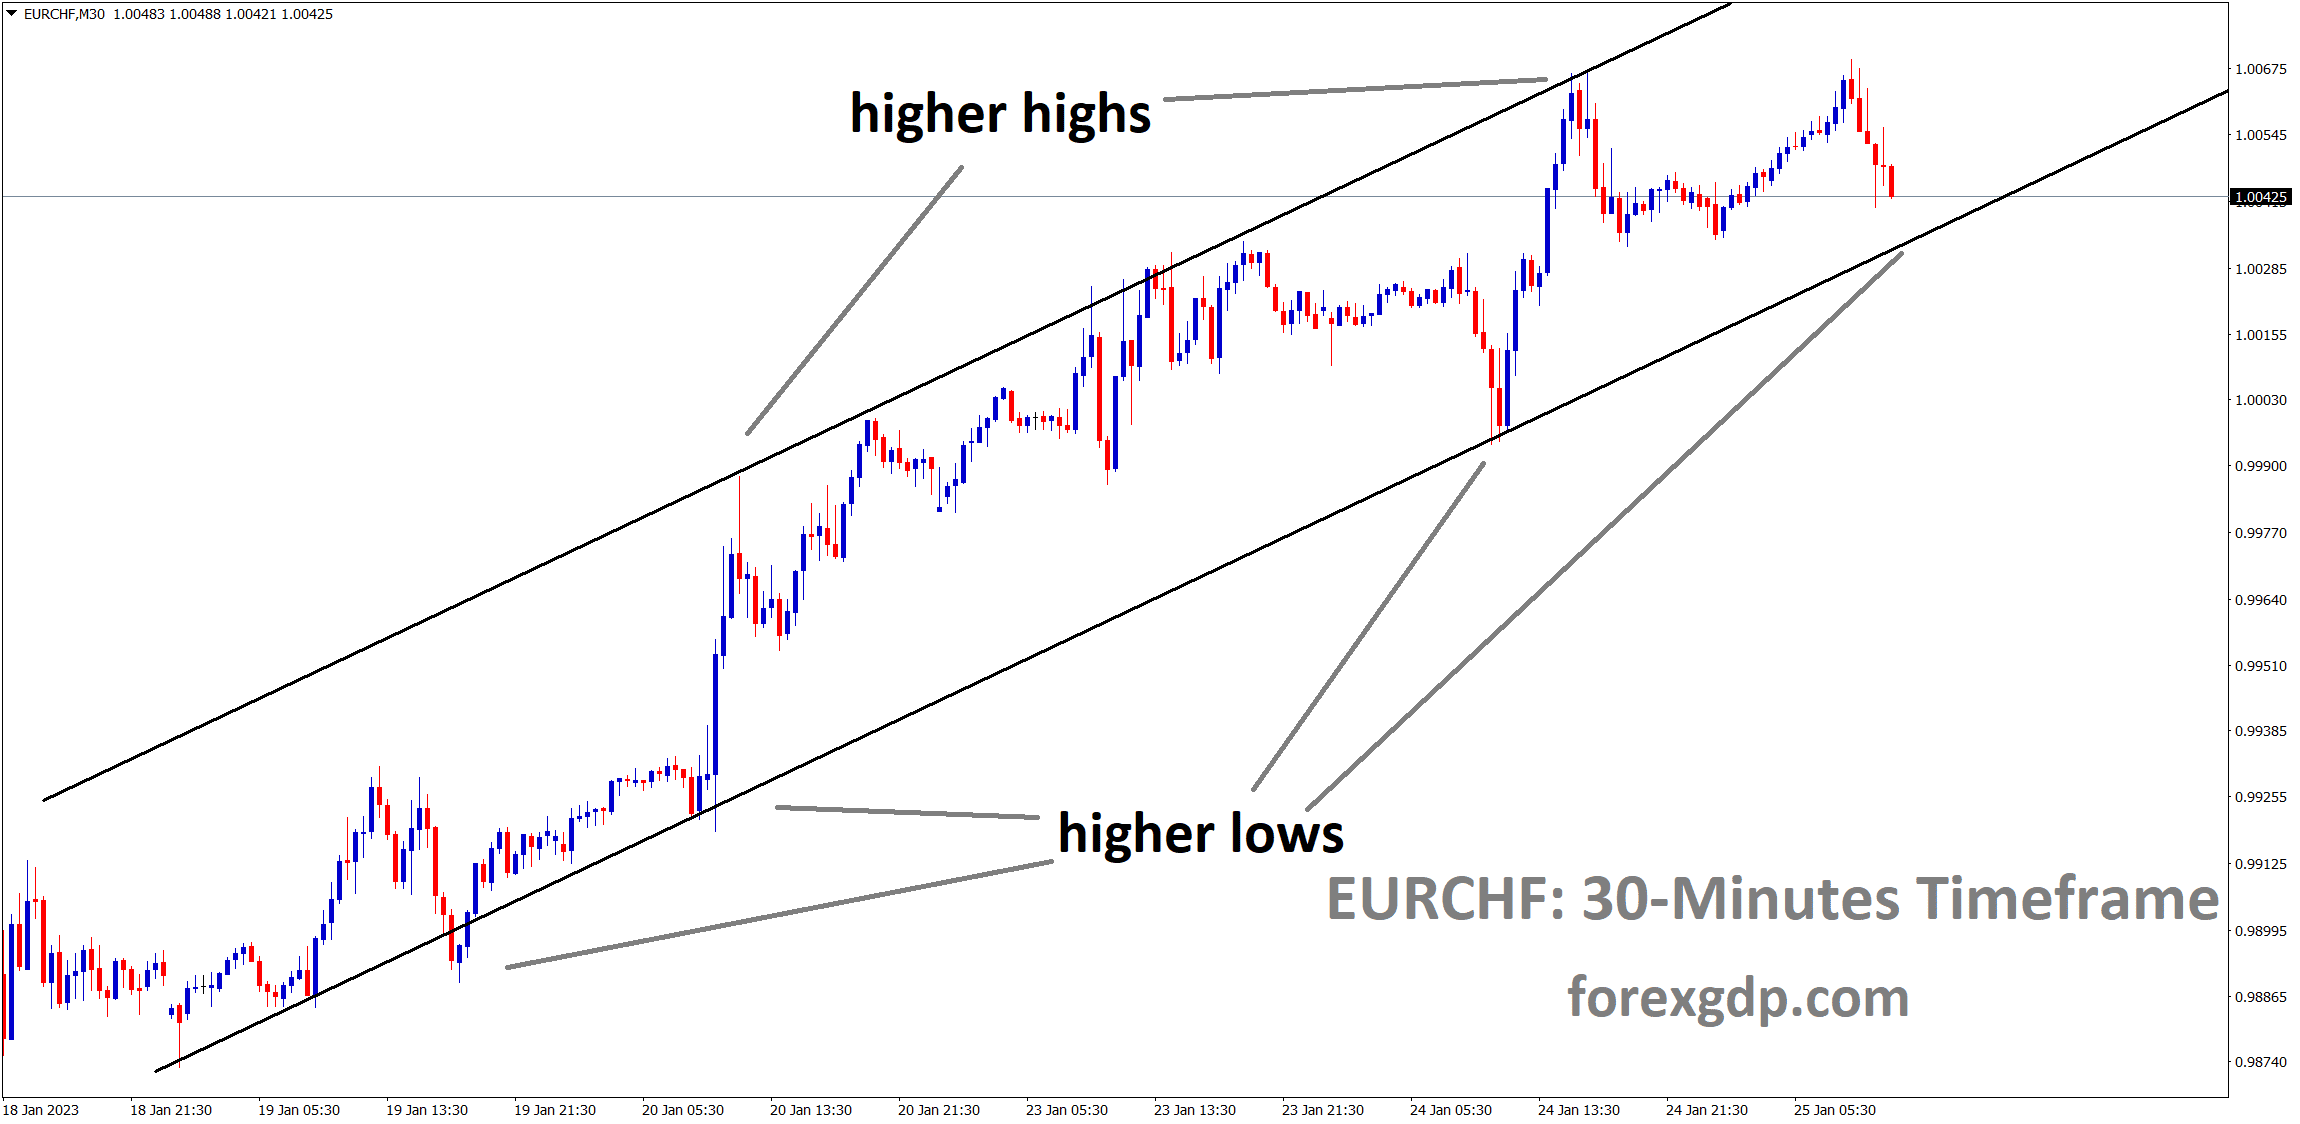 EURCHF is moving in a Ascending channel and the market has reached the higher low area of the channel.